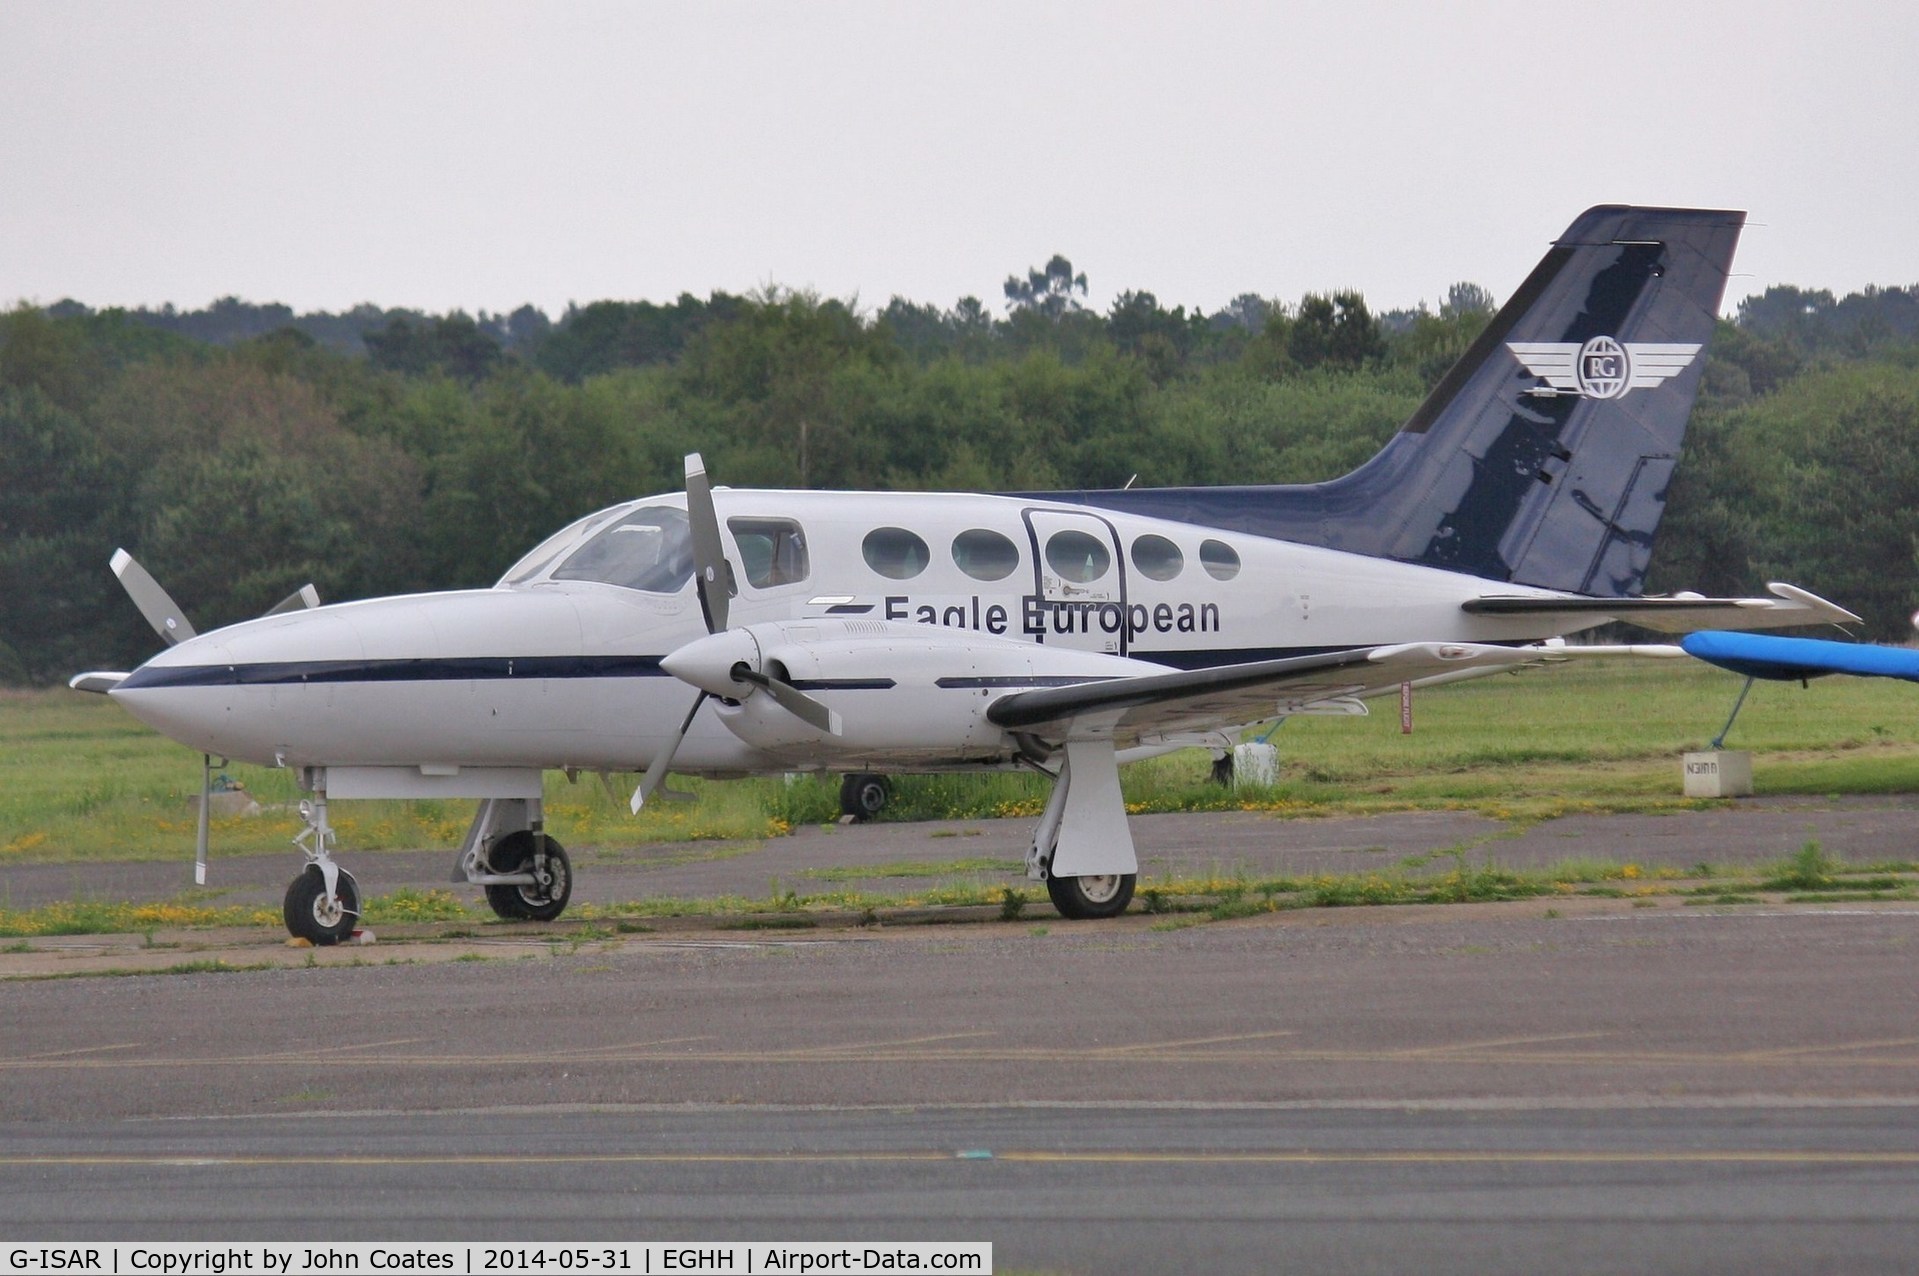 G-ISAR, 1980 Cessna 421C Golden Eagle C/N 421C-0848, New resident now with European Eagle Charter Comp